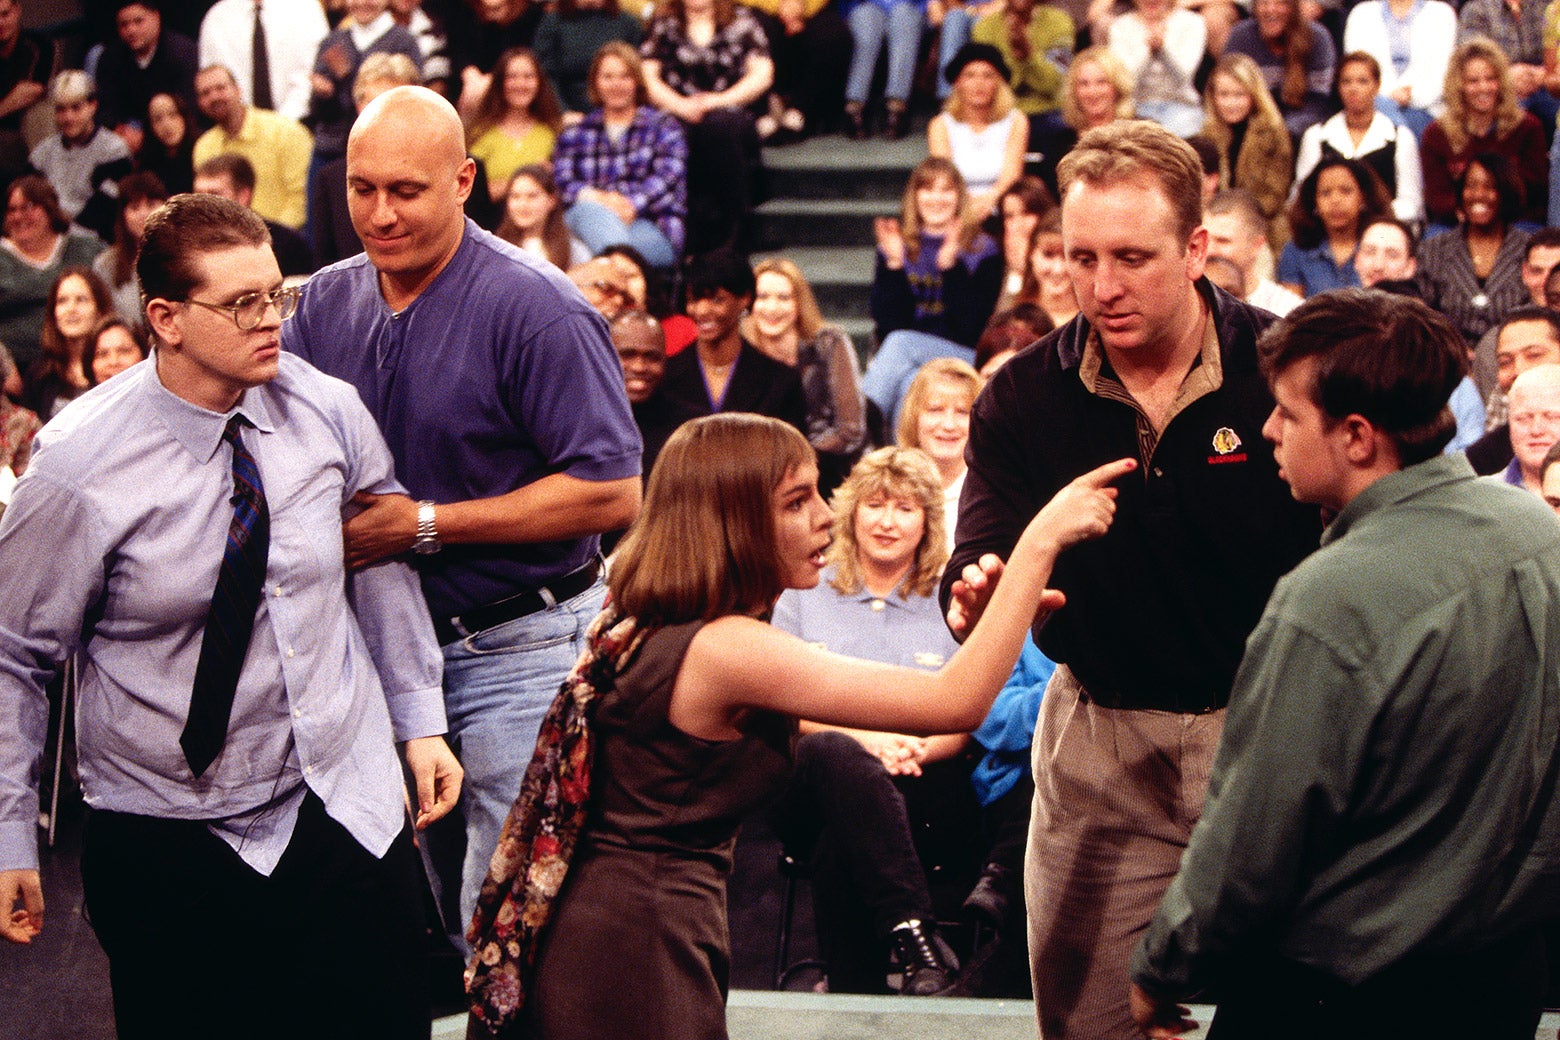 Guests argue on The Jerry Springer Show as security approaches to restrain them.